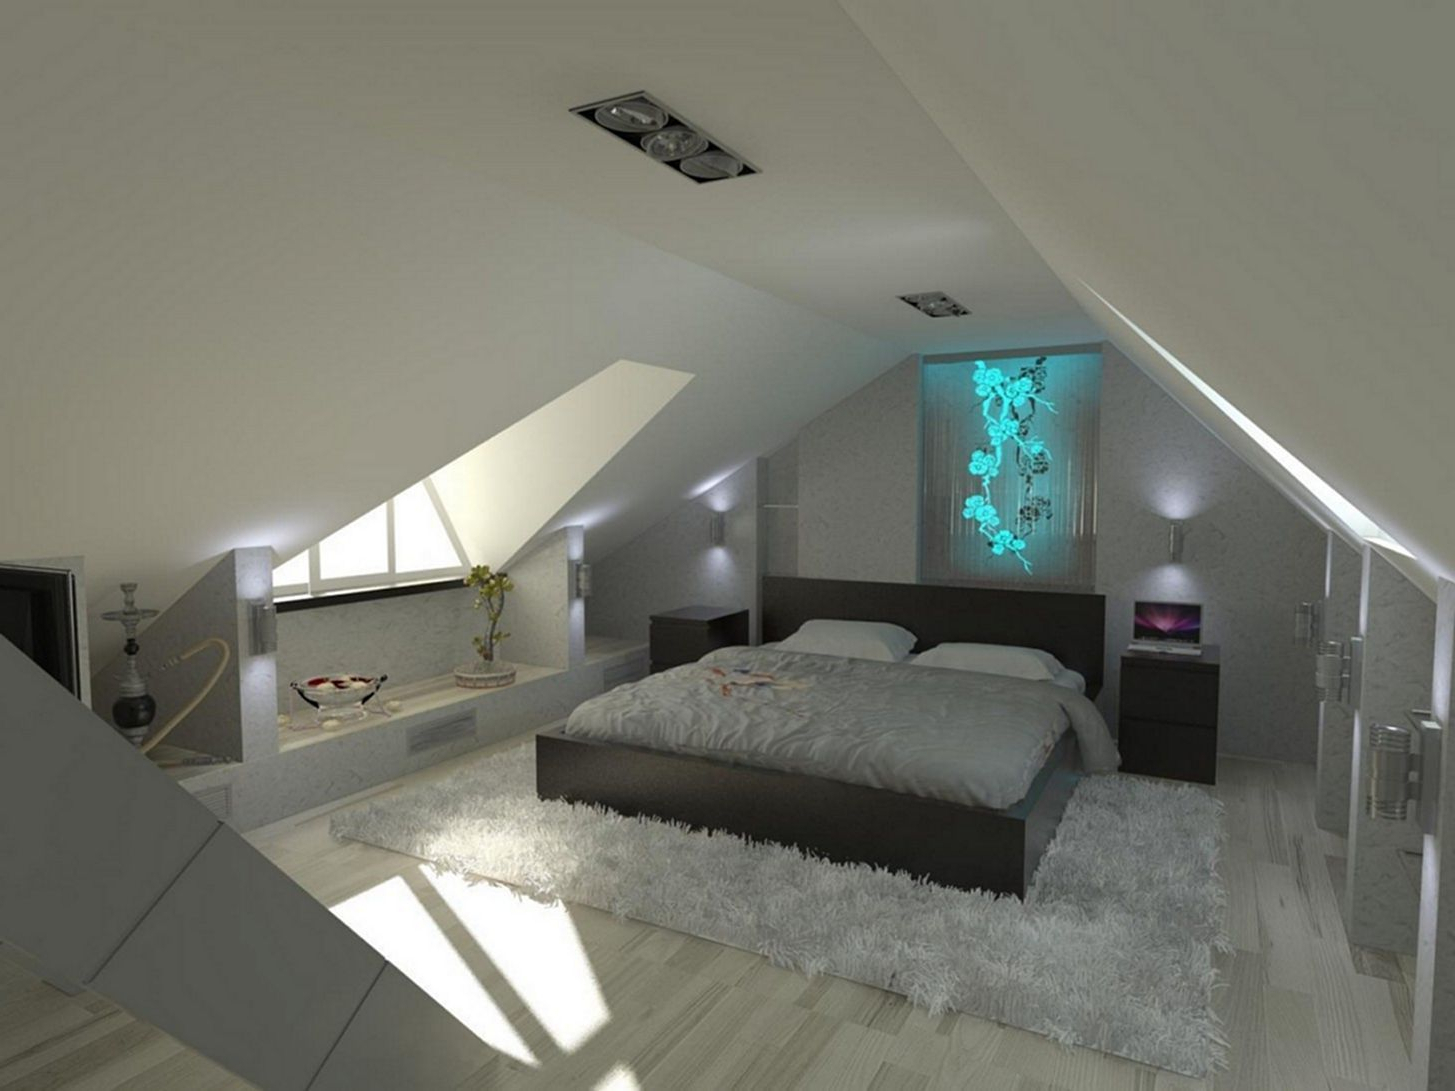 25 Amazing Attic Bedroom Ideas On A Budget In 2020